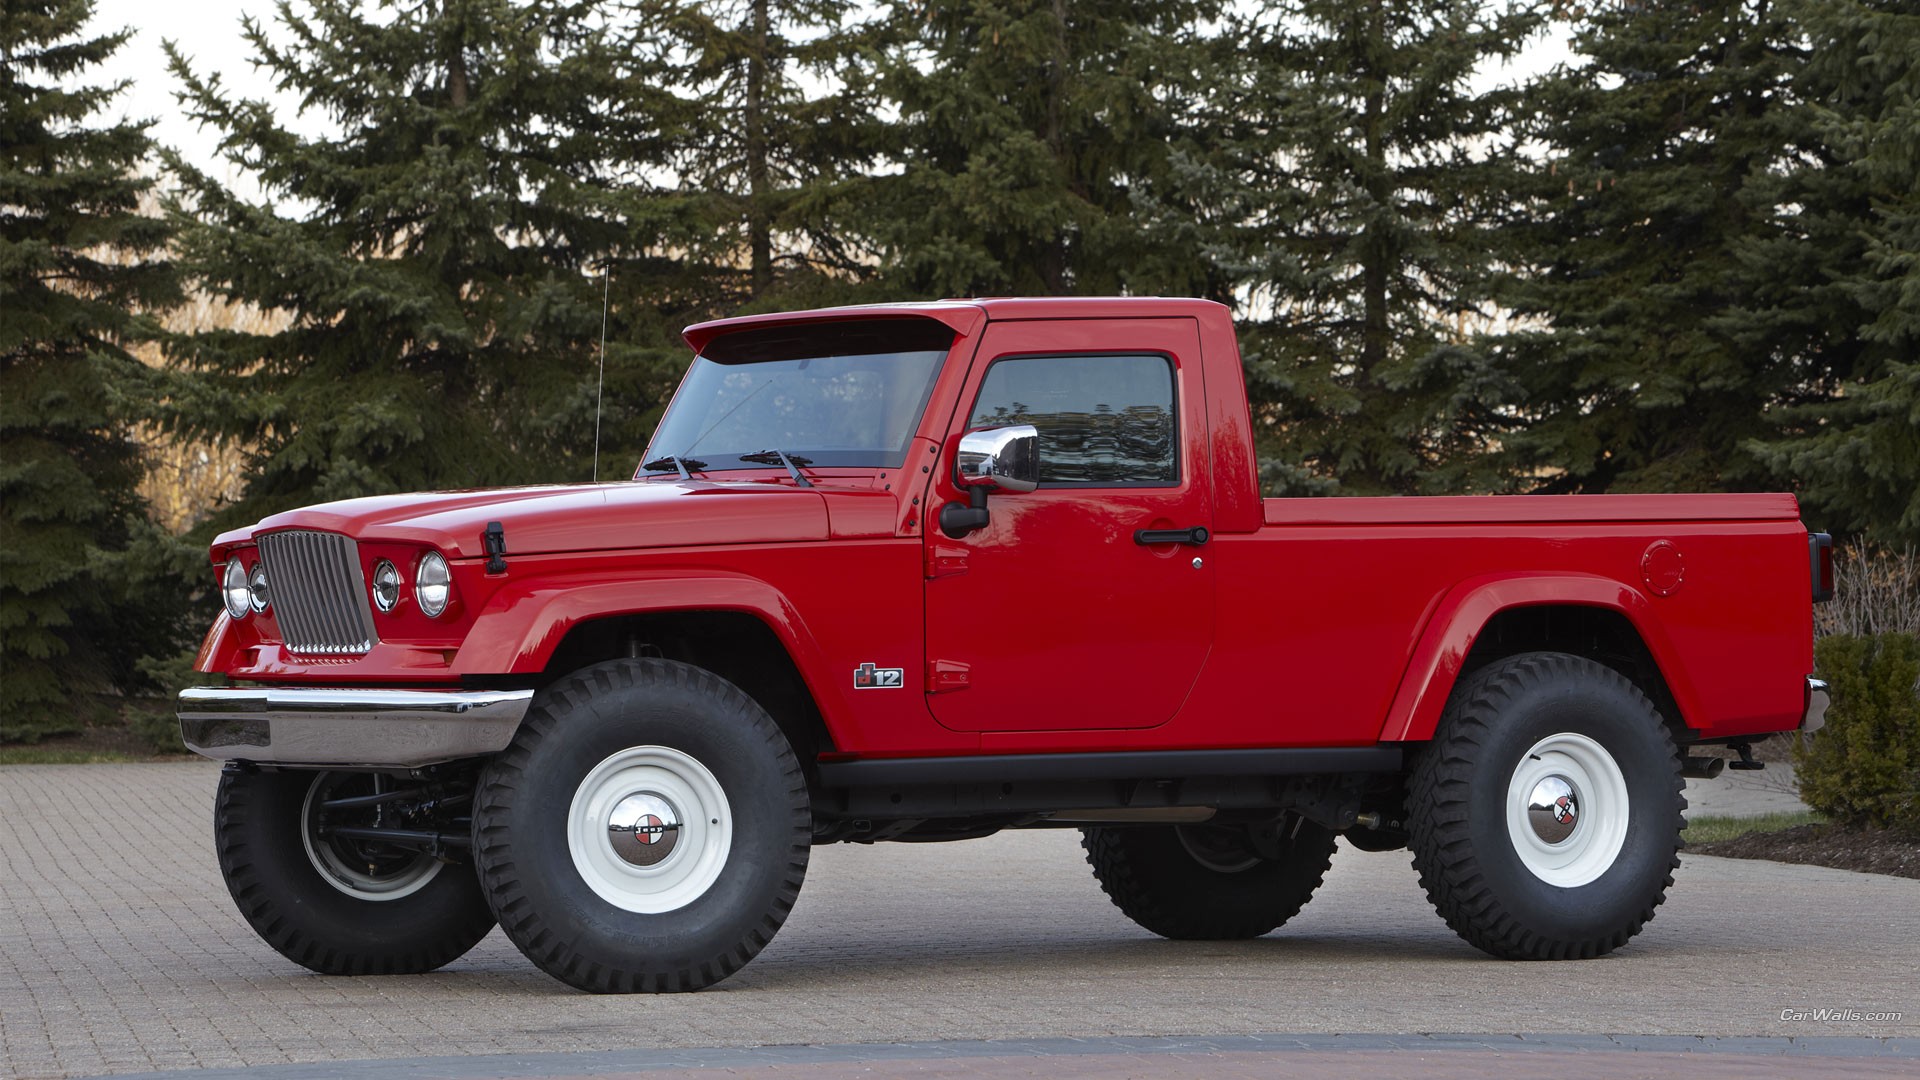 Jeep J 12, Concept Cars, Red Cars Wallpaper